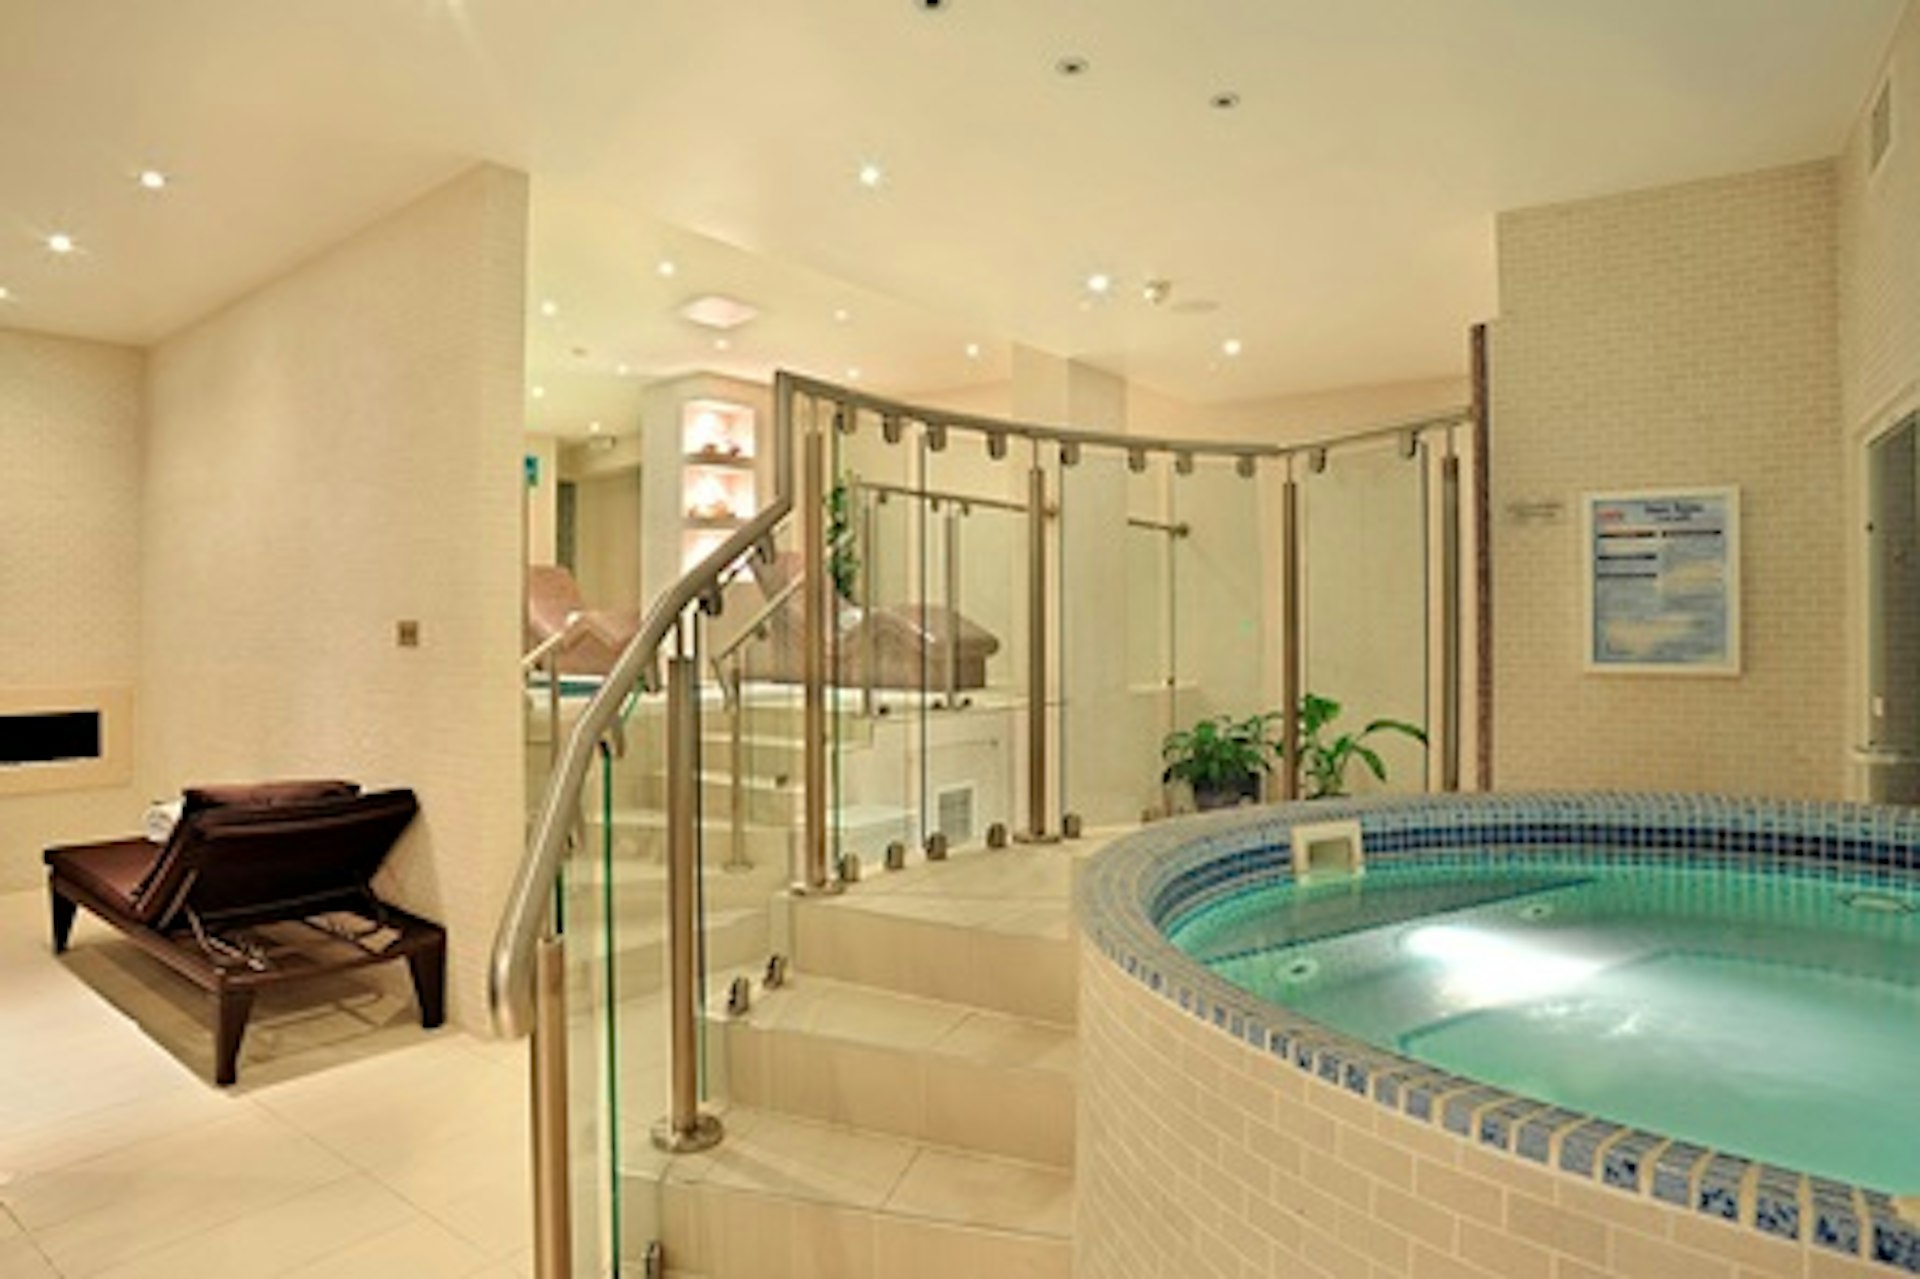 Weekday Spa Relaxation with Treatment and Prosecco at the 5* Montcalm Hotel, London 3